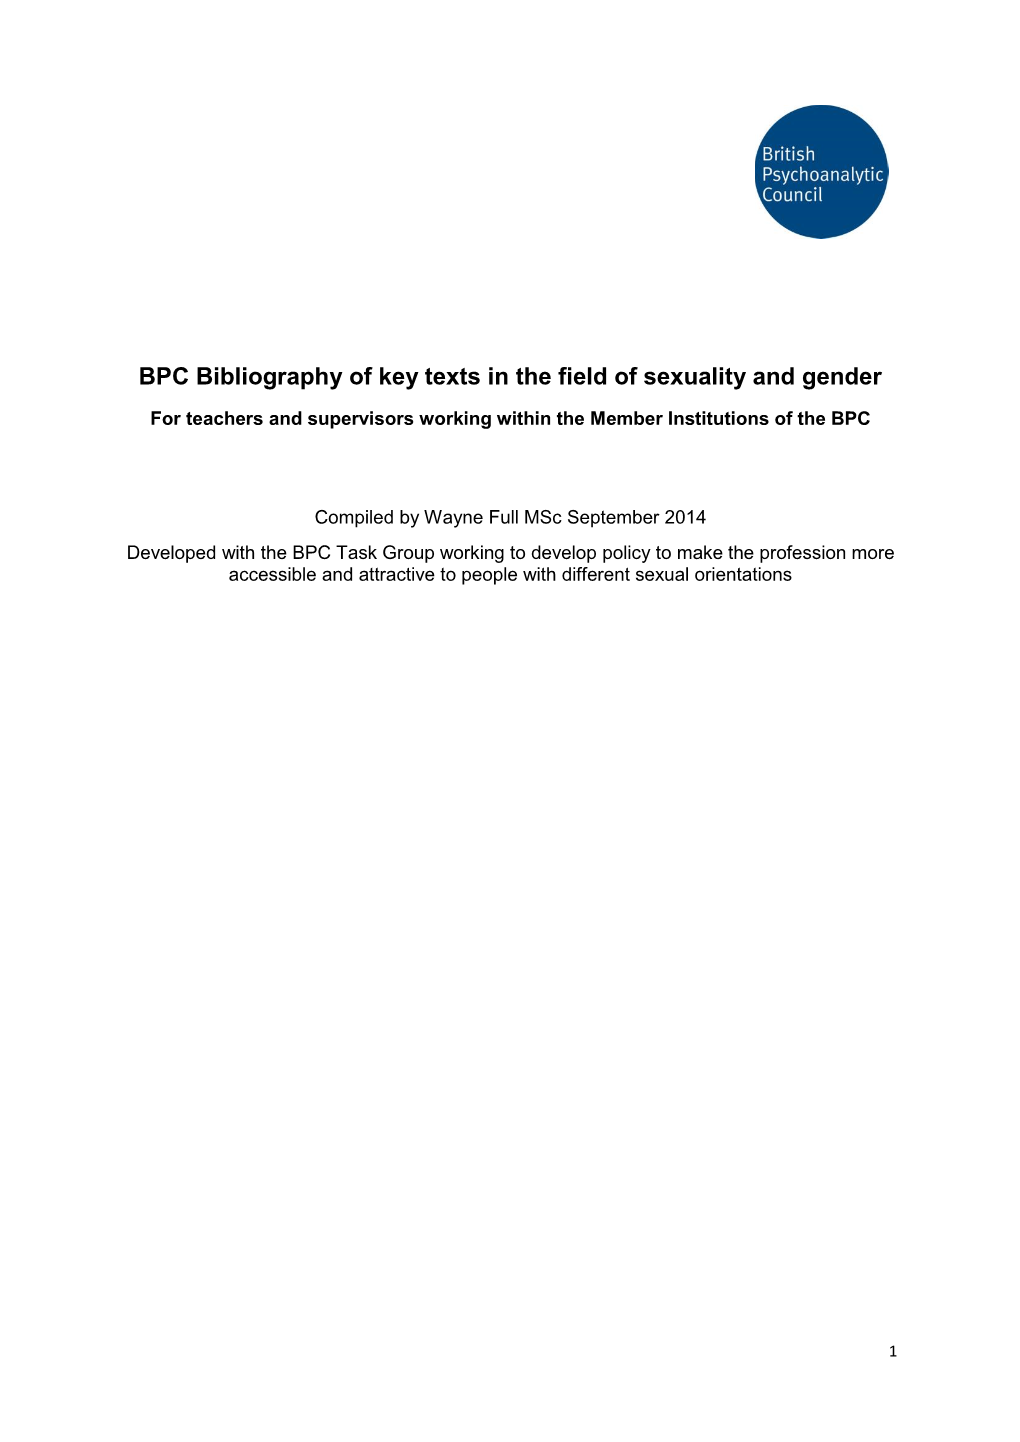 BPC Bibliography of Key Texts in the Field of Sexuality and Gender